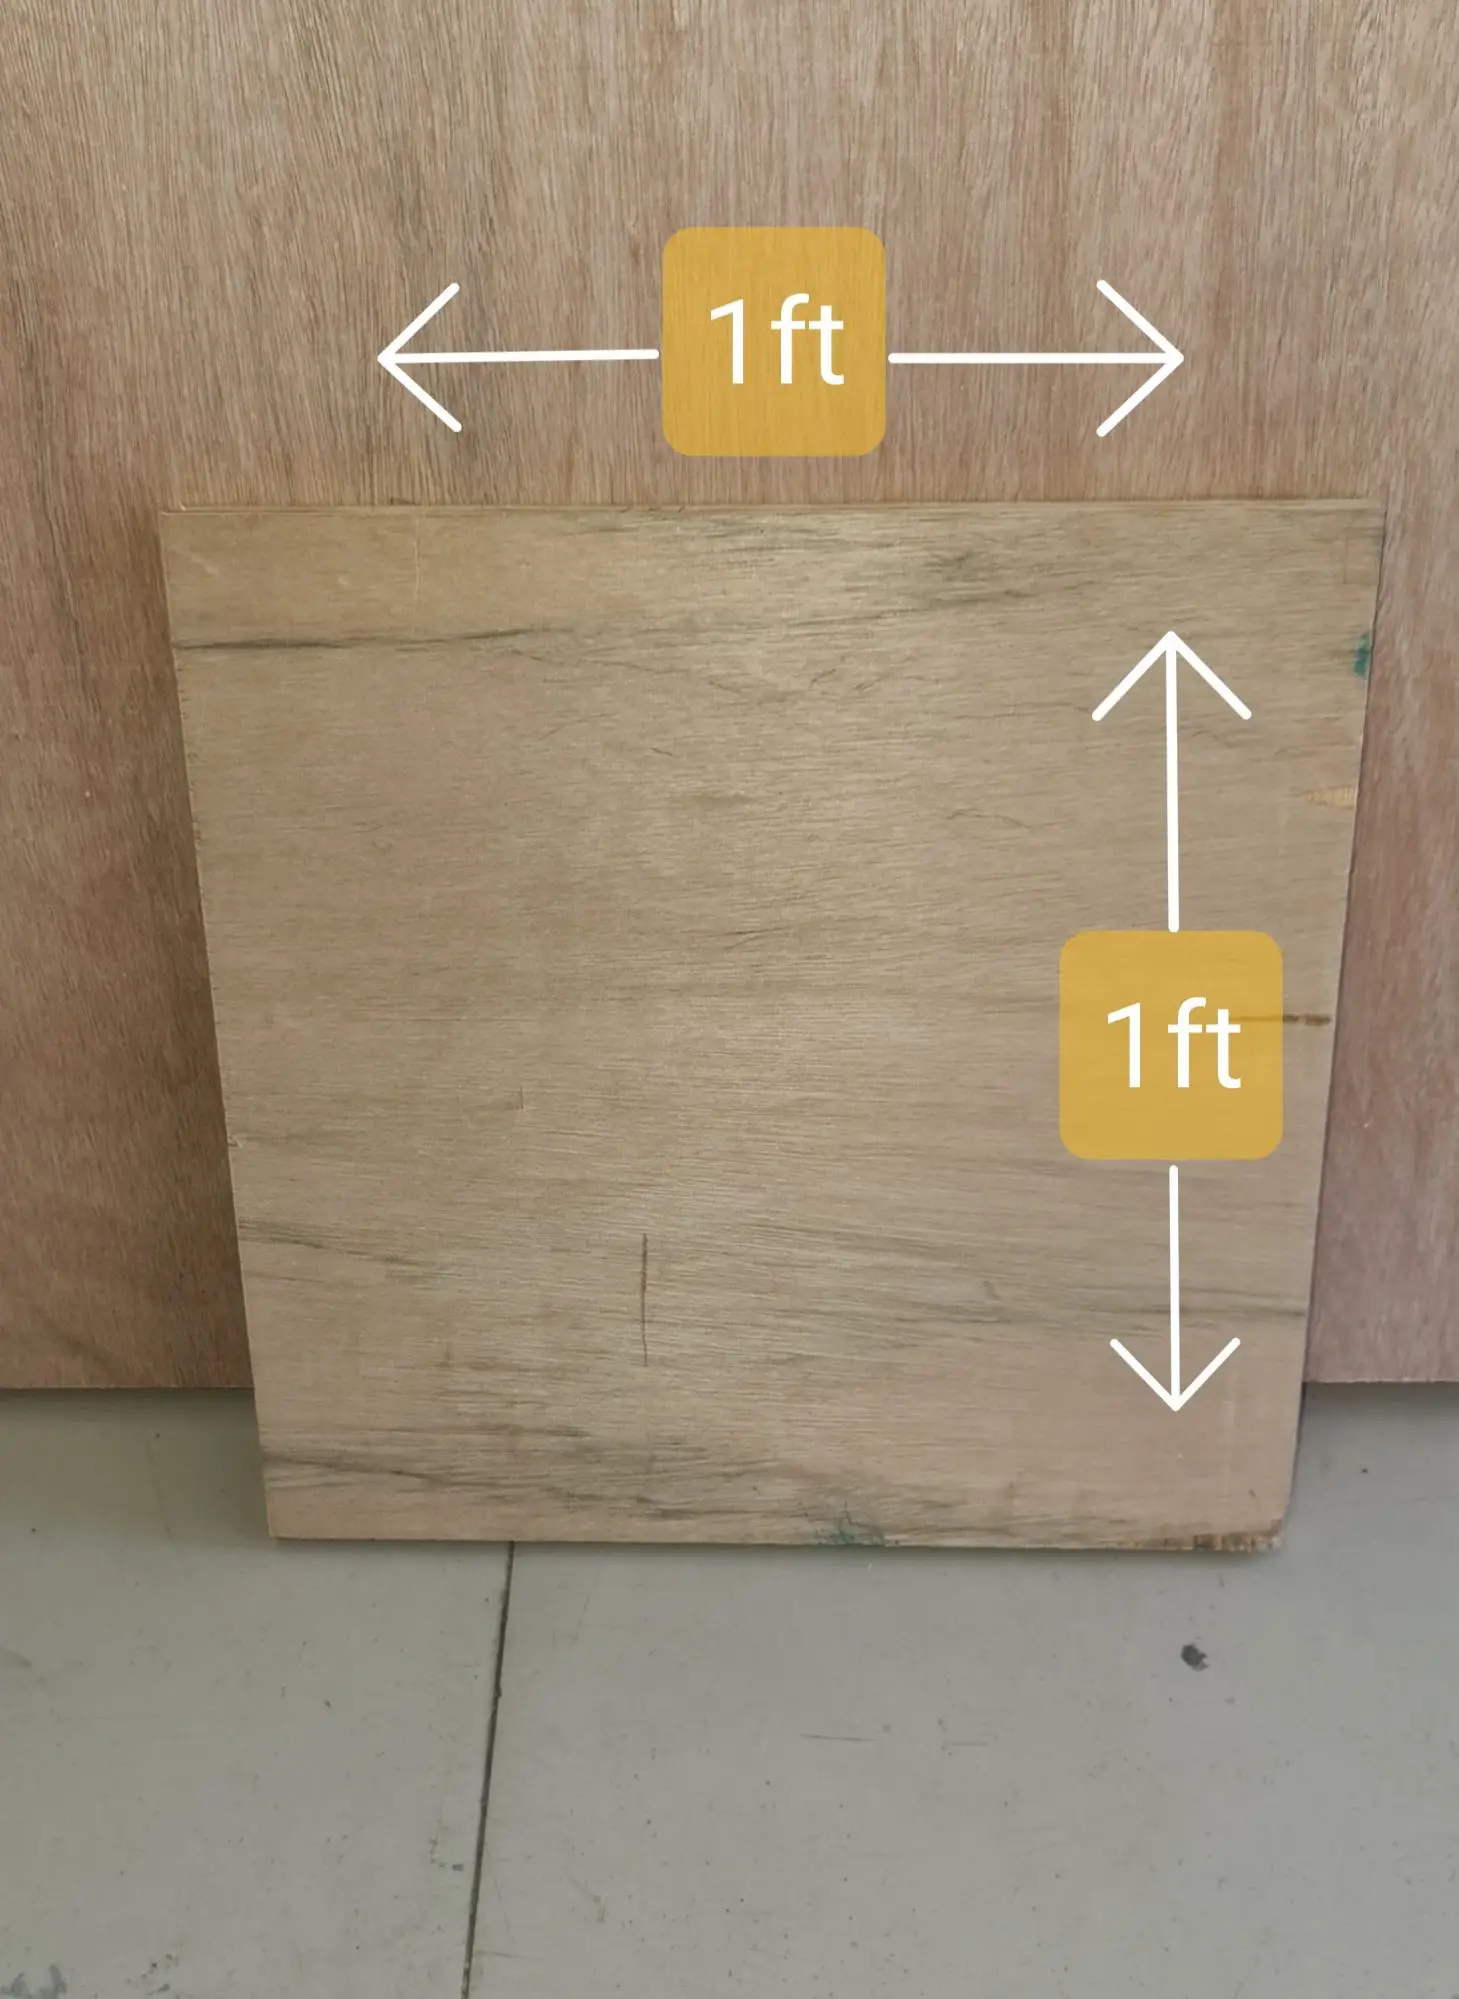 3/4 Plywood 1ft x 1ft to 3ft (1)